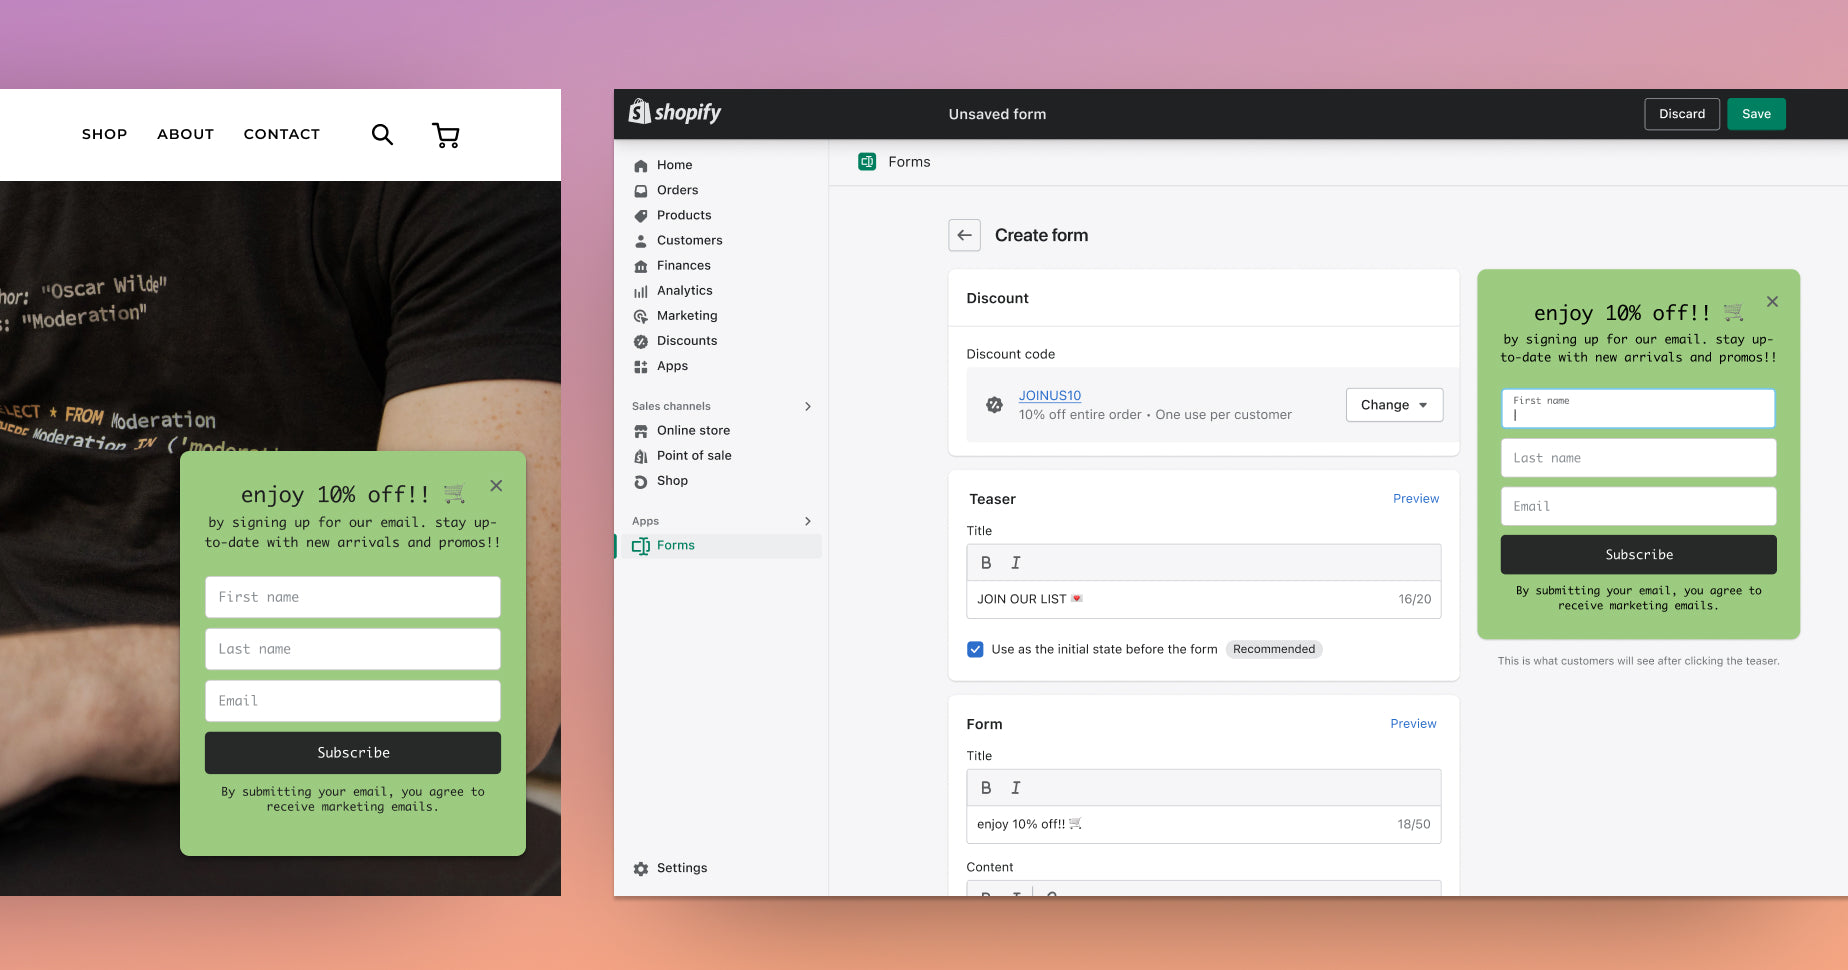 Shopify Forms is now available: a free email capture app for your online store